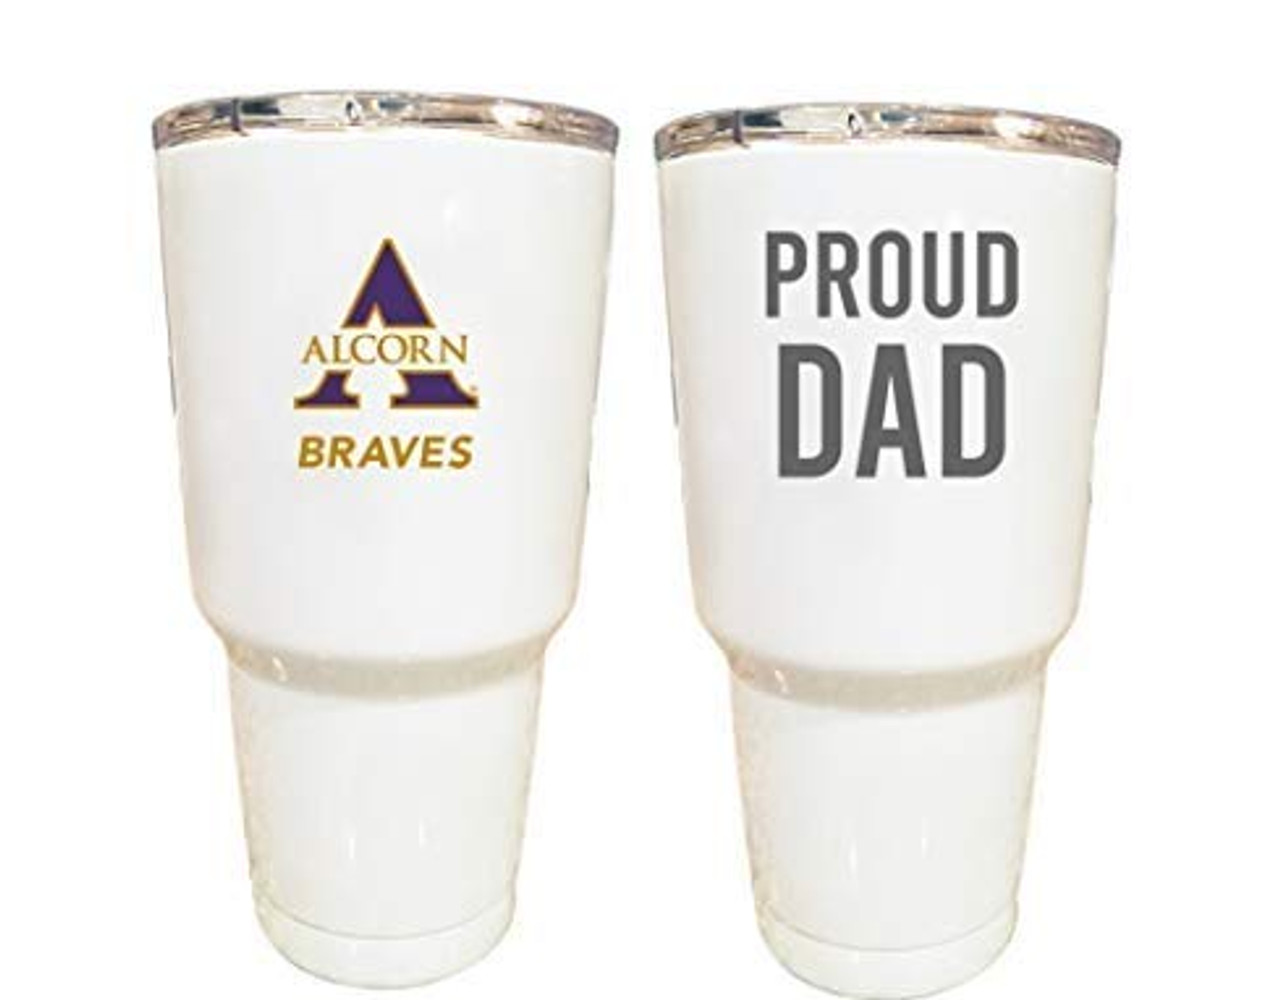 Alcorn State Braves Proud Dad 24 oz Insulated Stainless Steel Tumblers White.